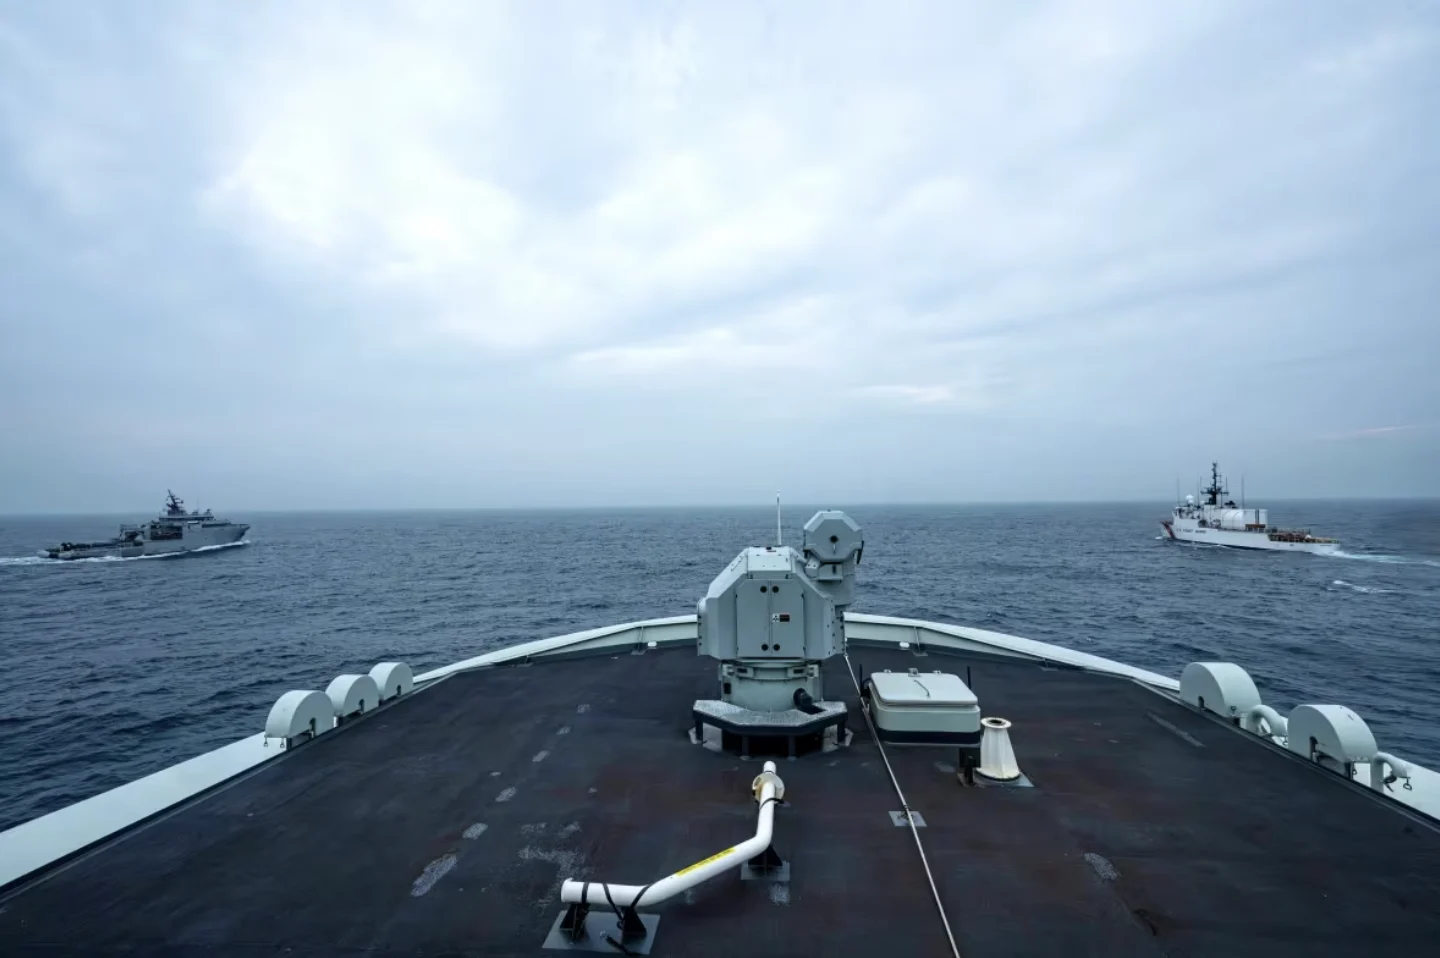 cbc: HMCS Harry DeWolf sailing between two allied ships. (Private Brendan Gamache/CAF Imagery Technician)